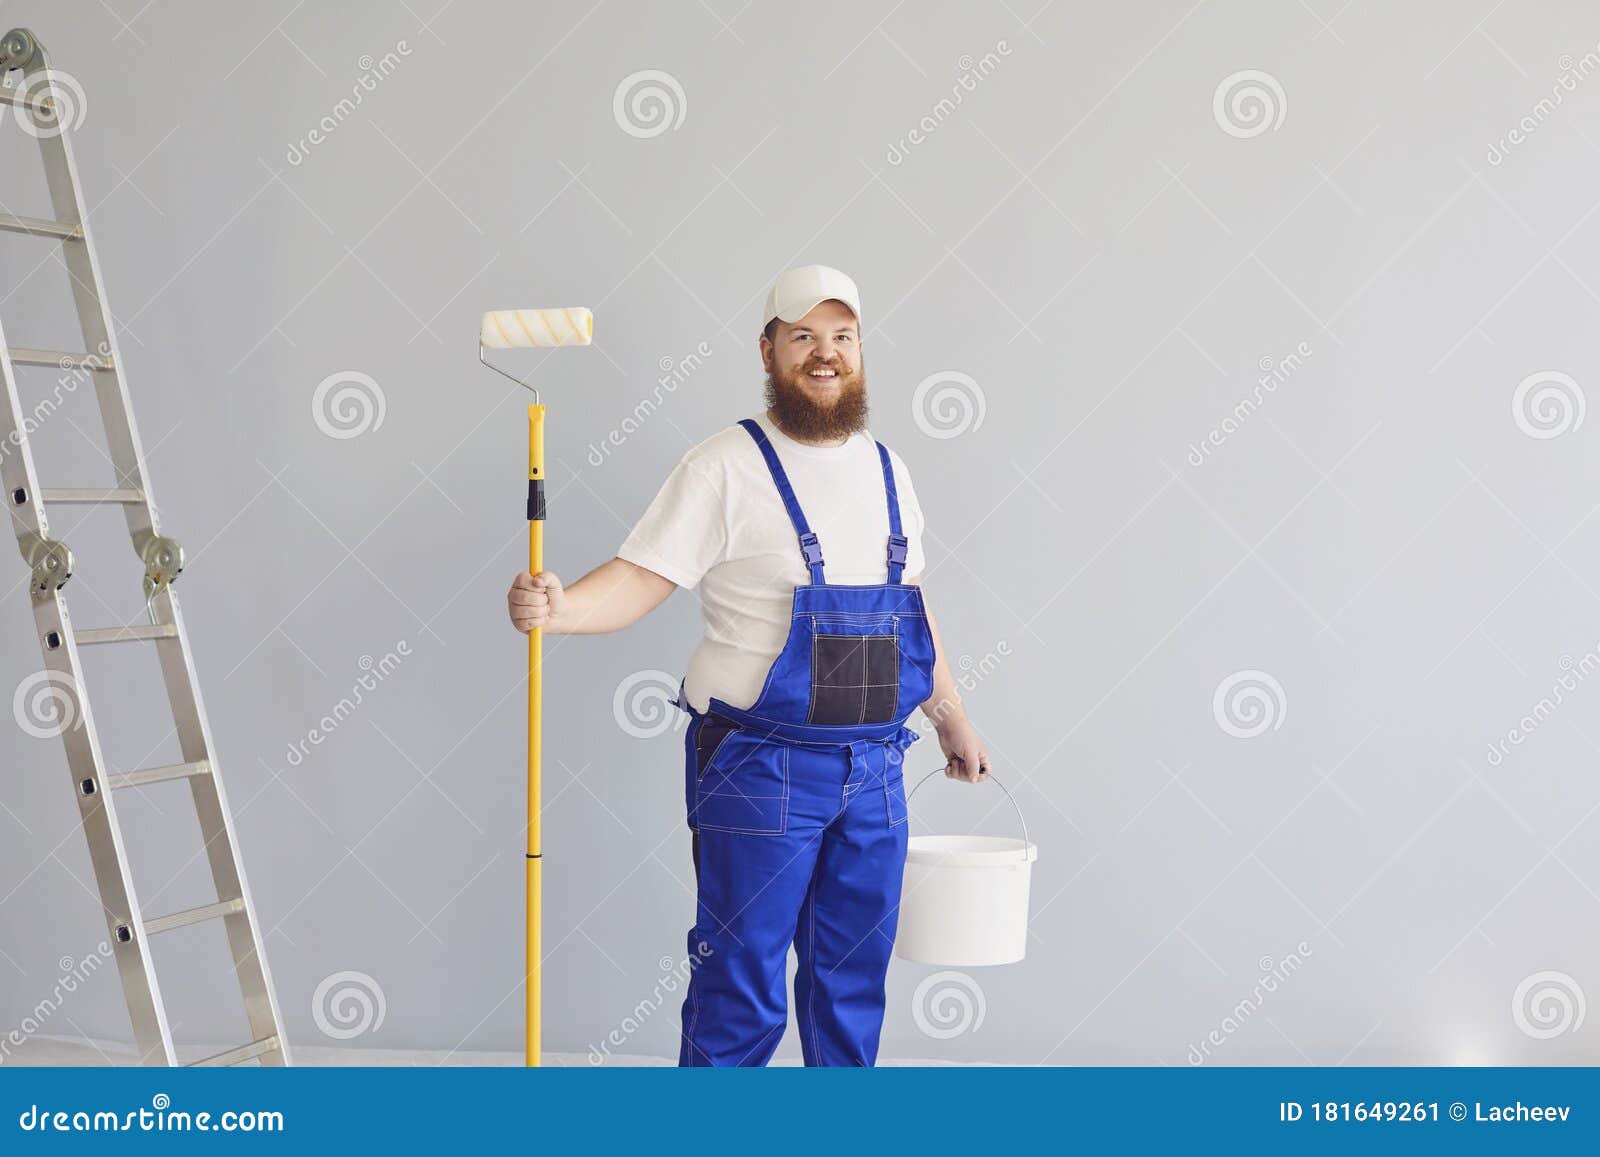 Painter Painting. Funny Male Painter with a Roller Skater Standing Paints  in the Background. Stock Image - Image of house, drawing: 181649261